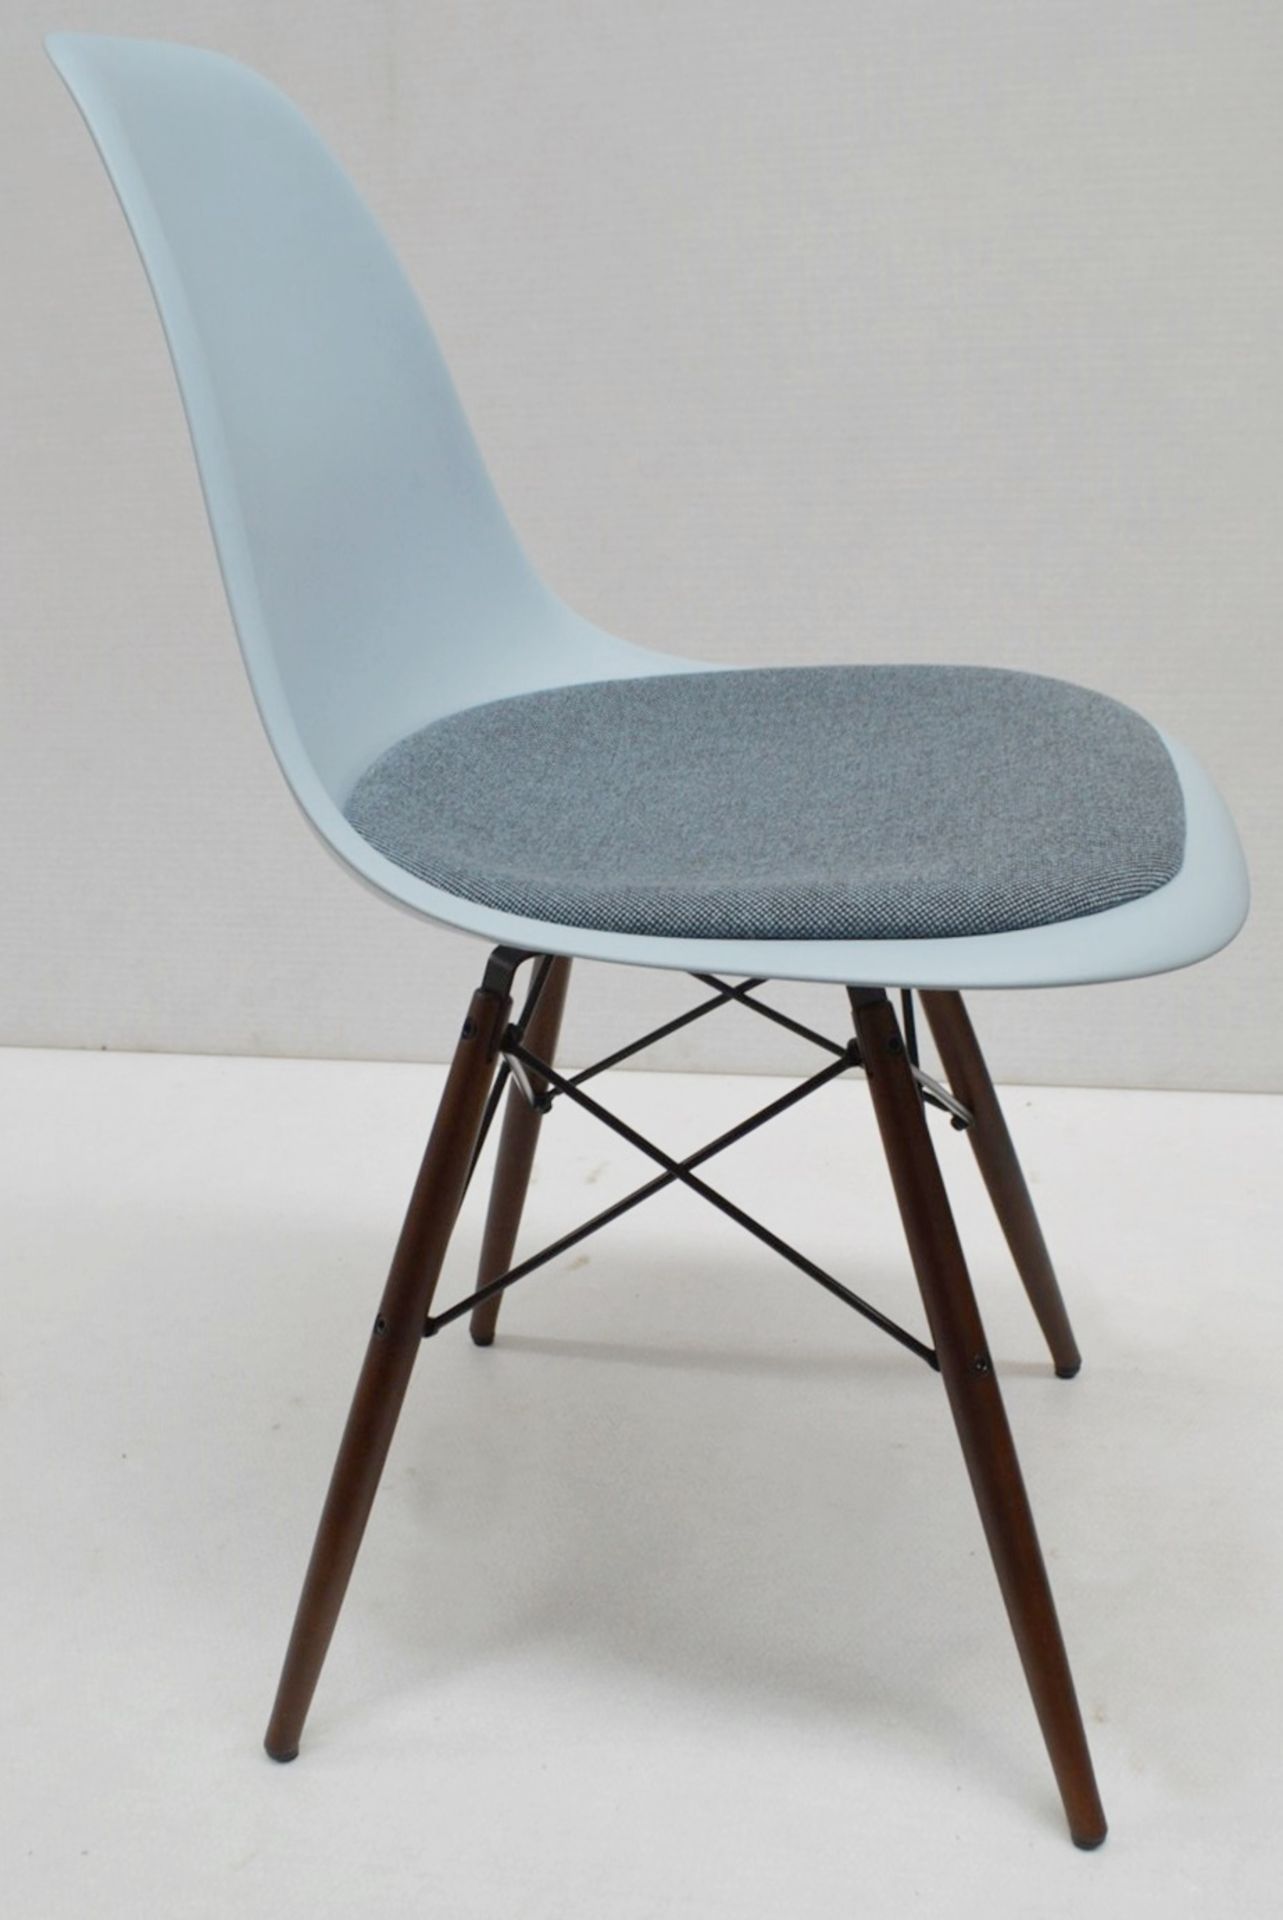 1 x VITRA Eames DSW Designer Chair With Upholsted Seat And Maple Base In A Dark Stain - Image 9 of 9